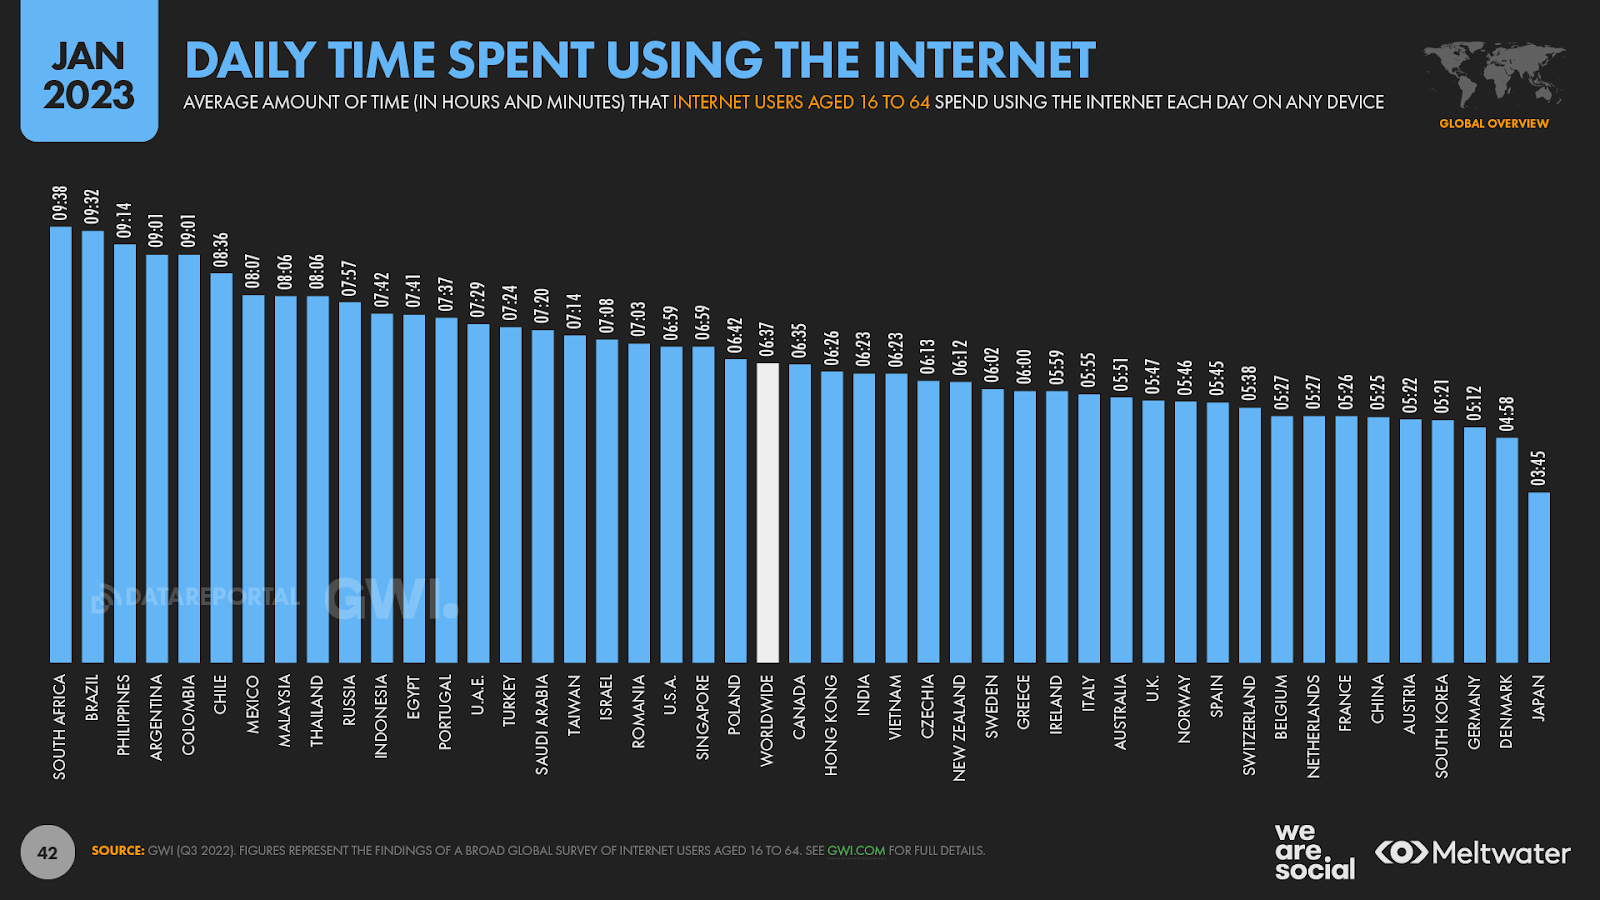  This image is a pictorial representation that shows how Online time decreases, but the internet's importance remains. Users prioritize quality over quantity 